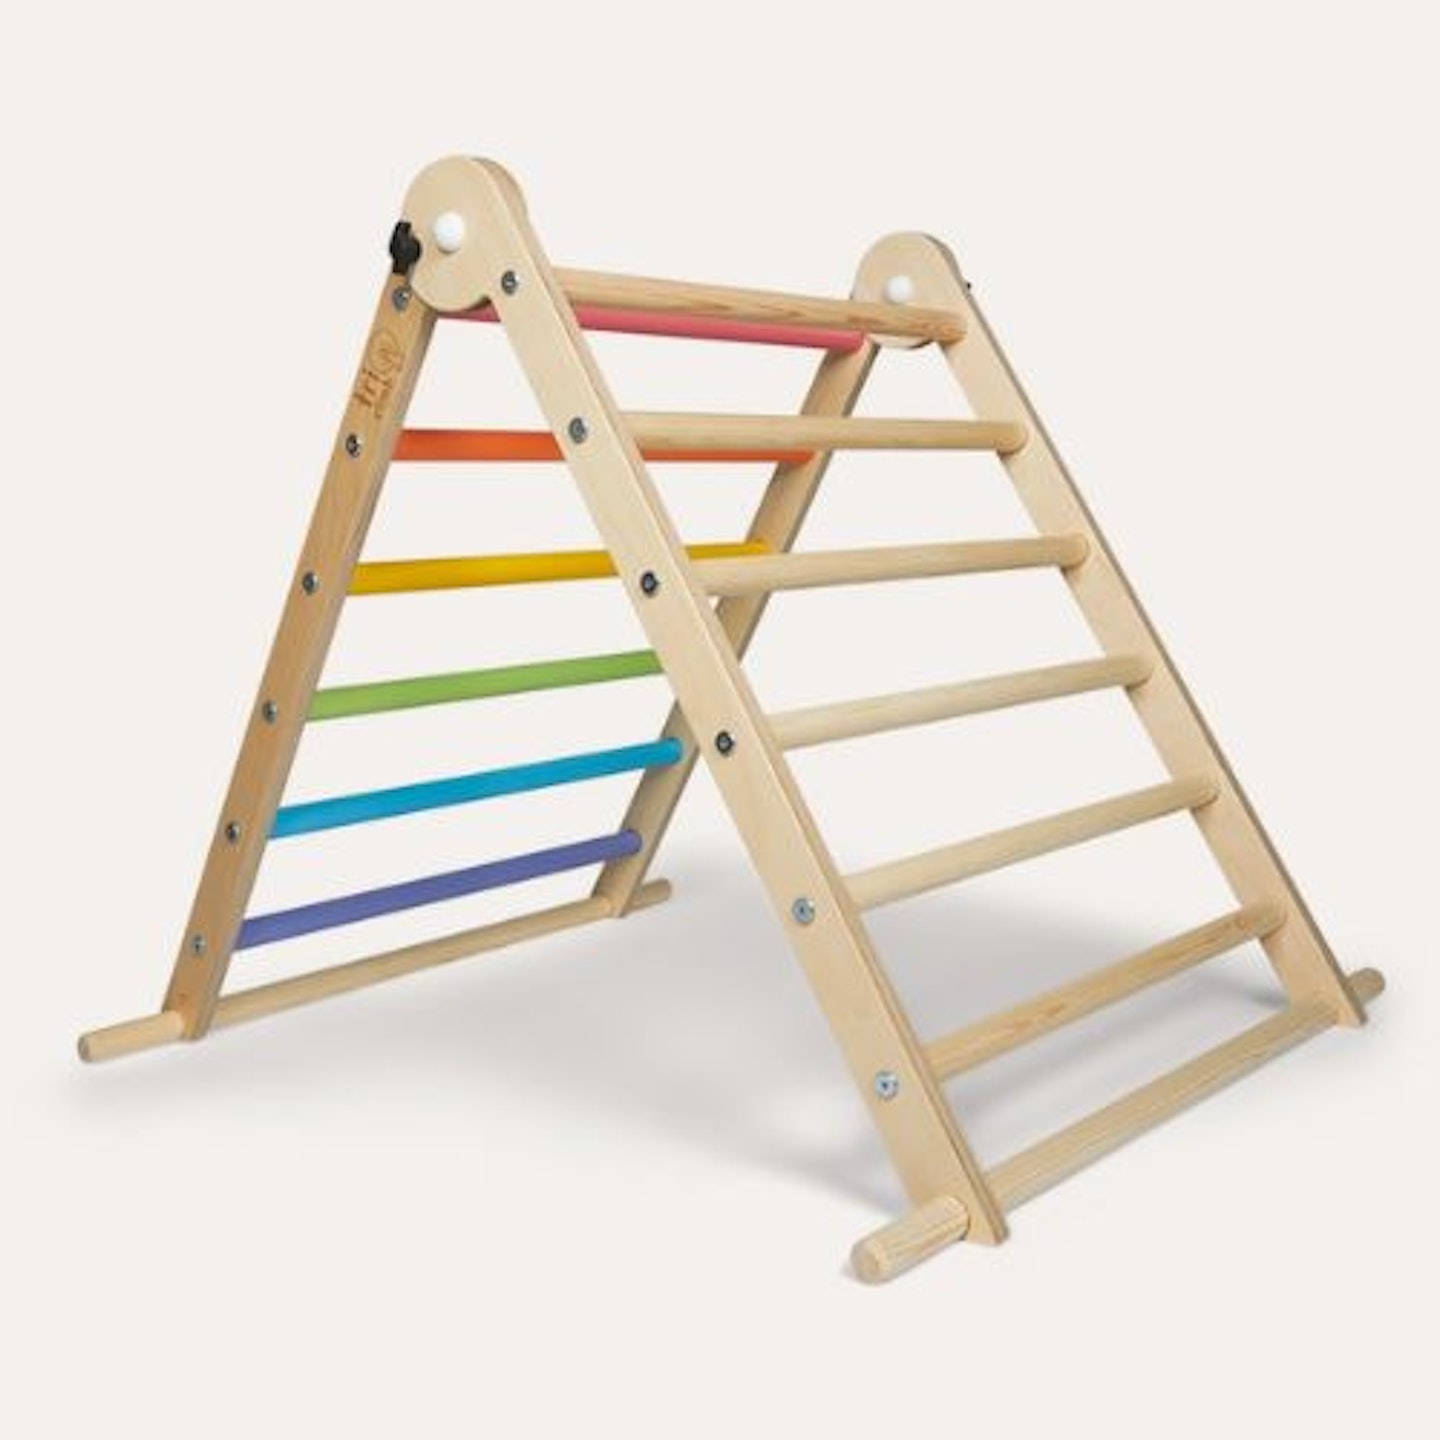 Best indoor climbers for toddlers Triclimb